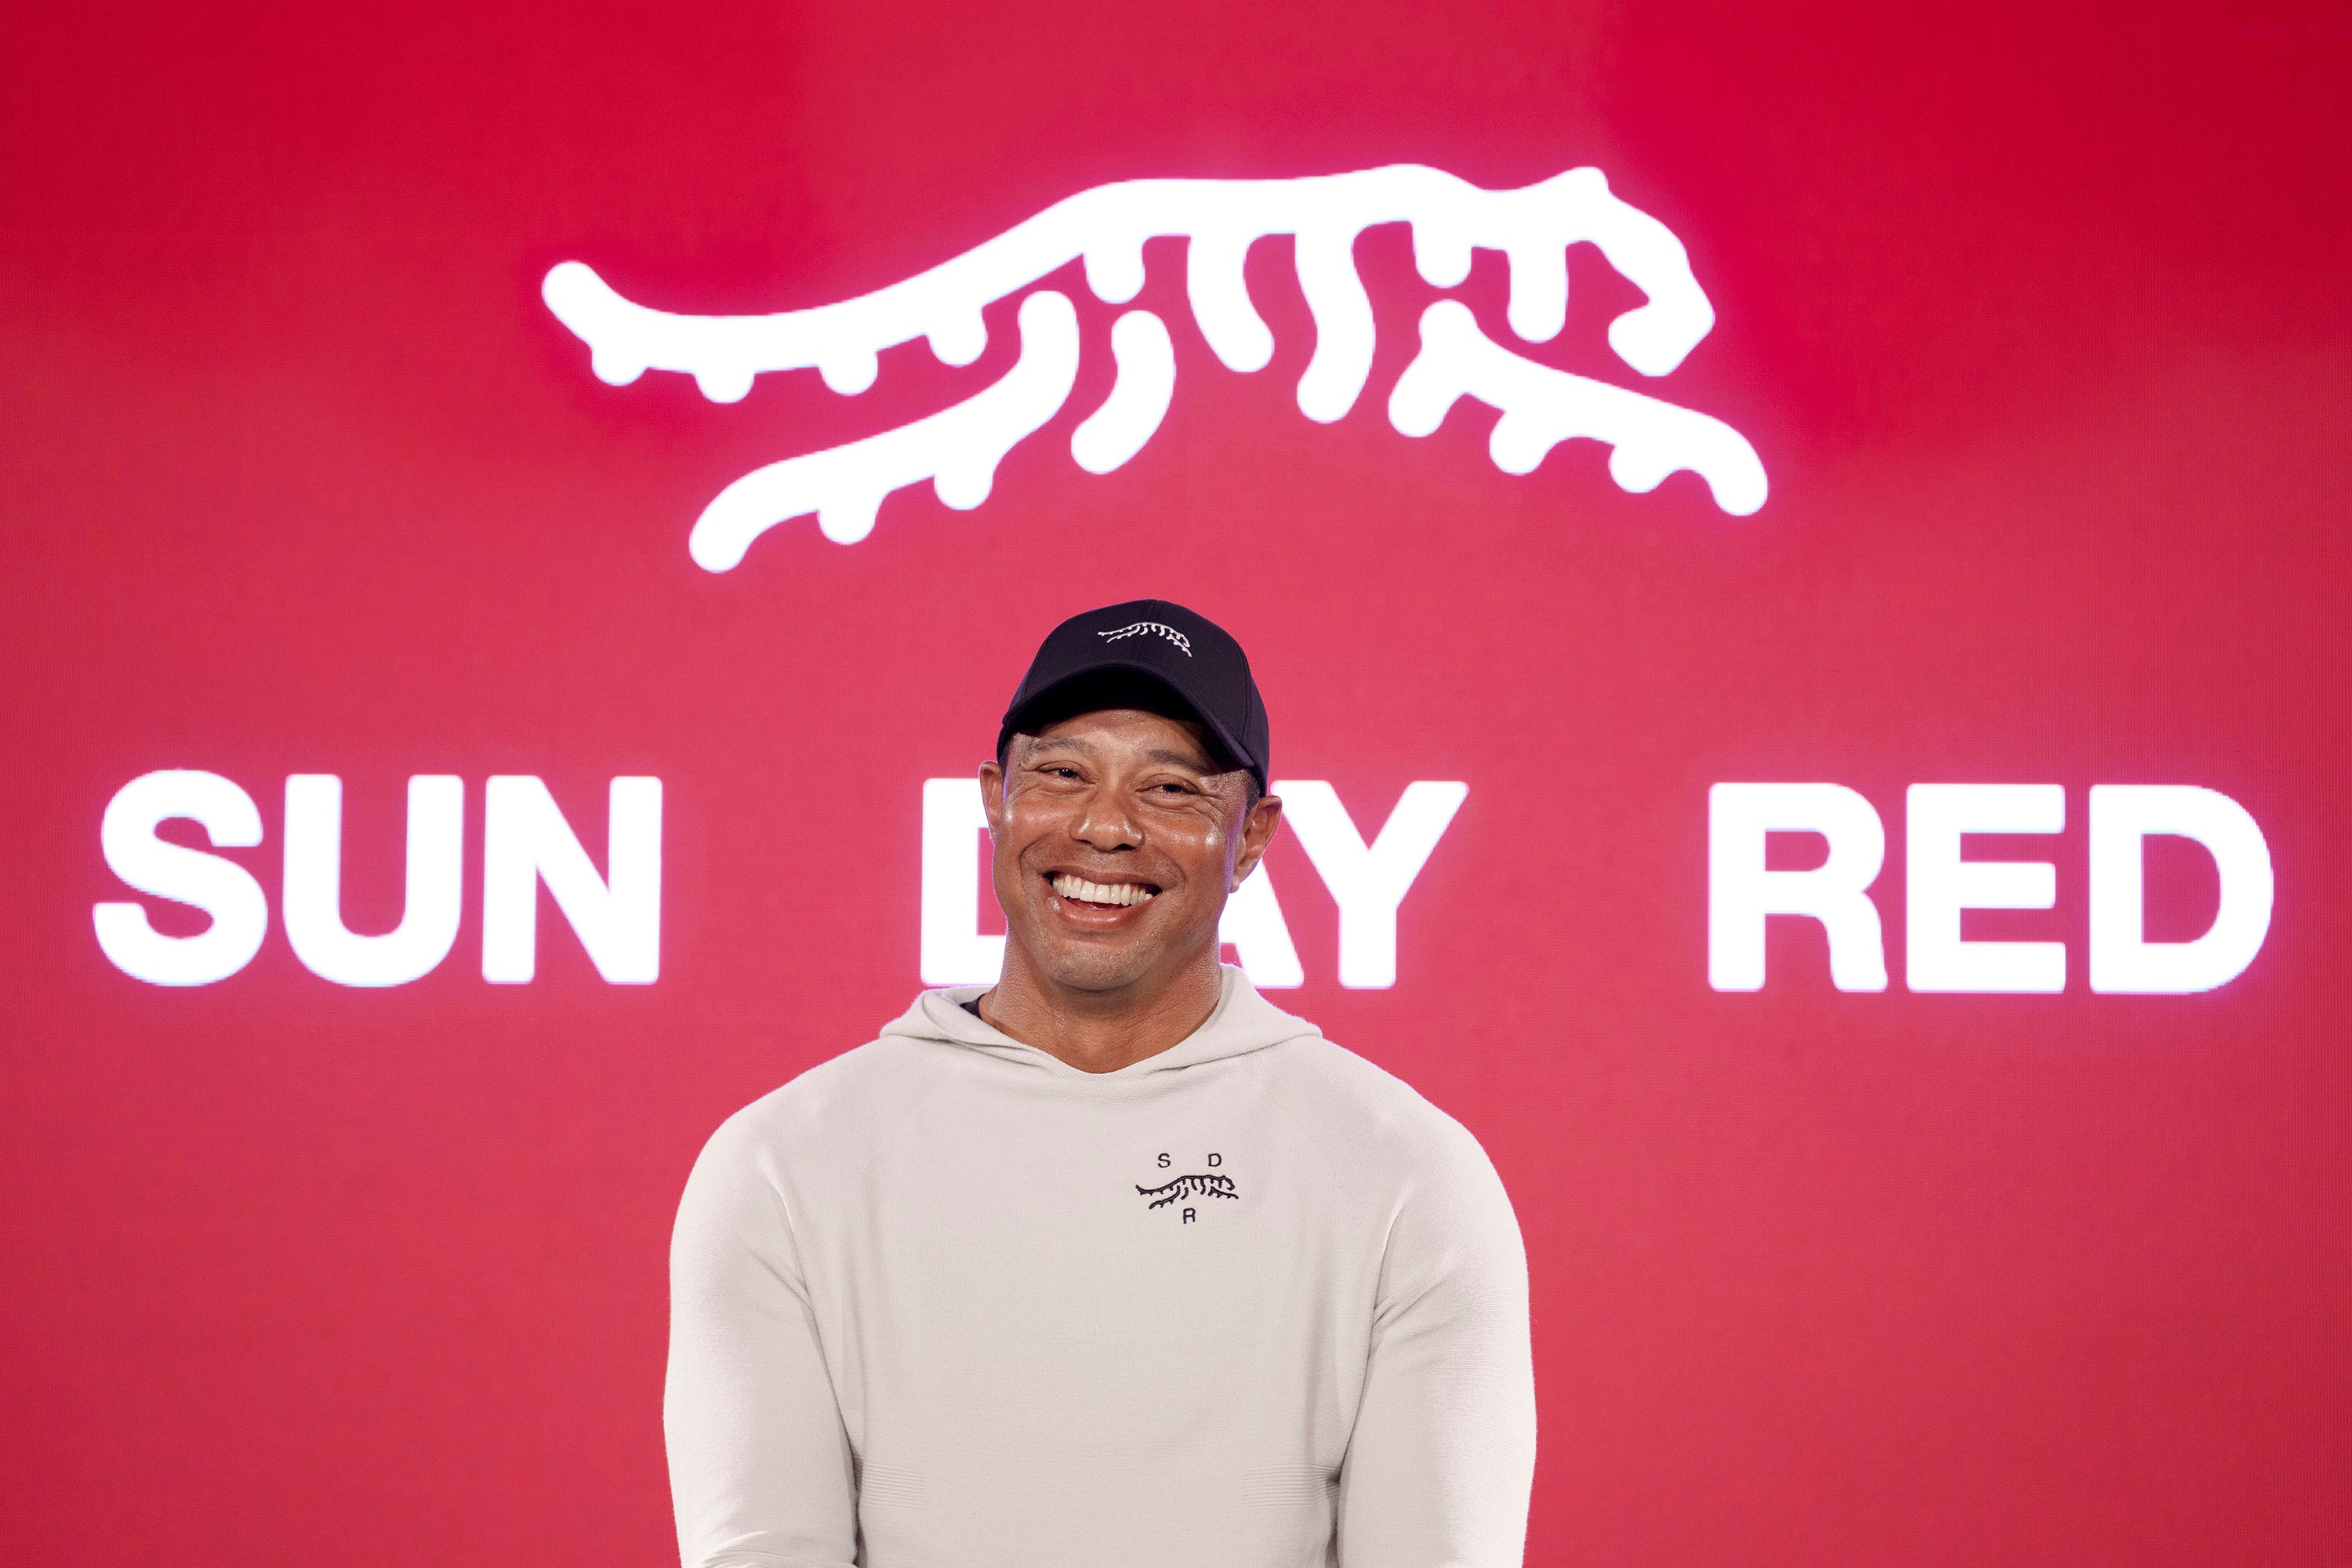 Sun Day Red: What to know about Tiger Wood's apparel brand